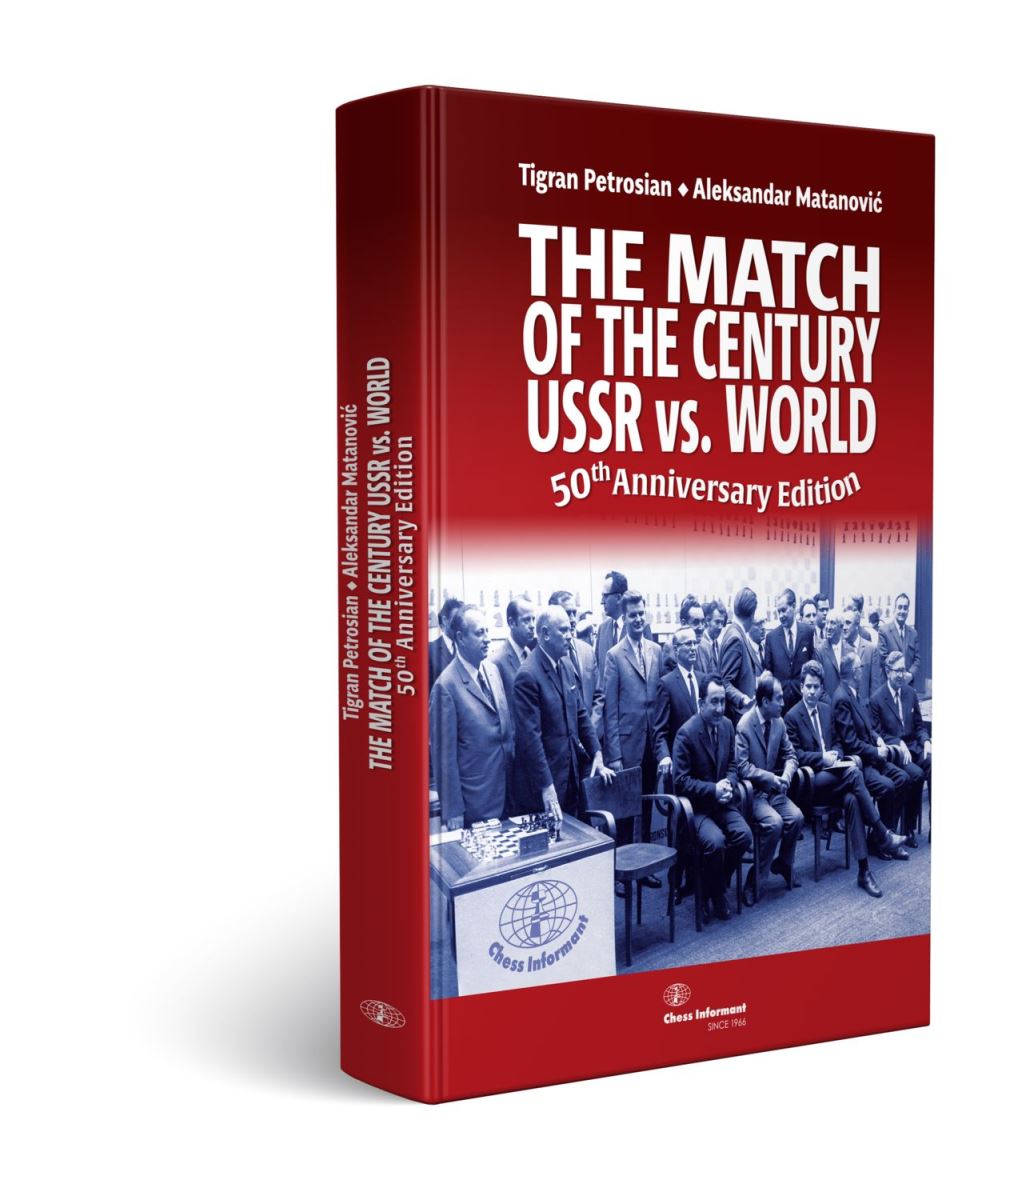 USSR vs Rest of the World: A look back - Stabroek News